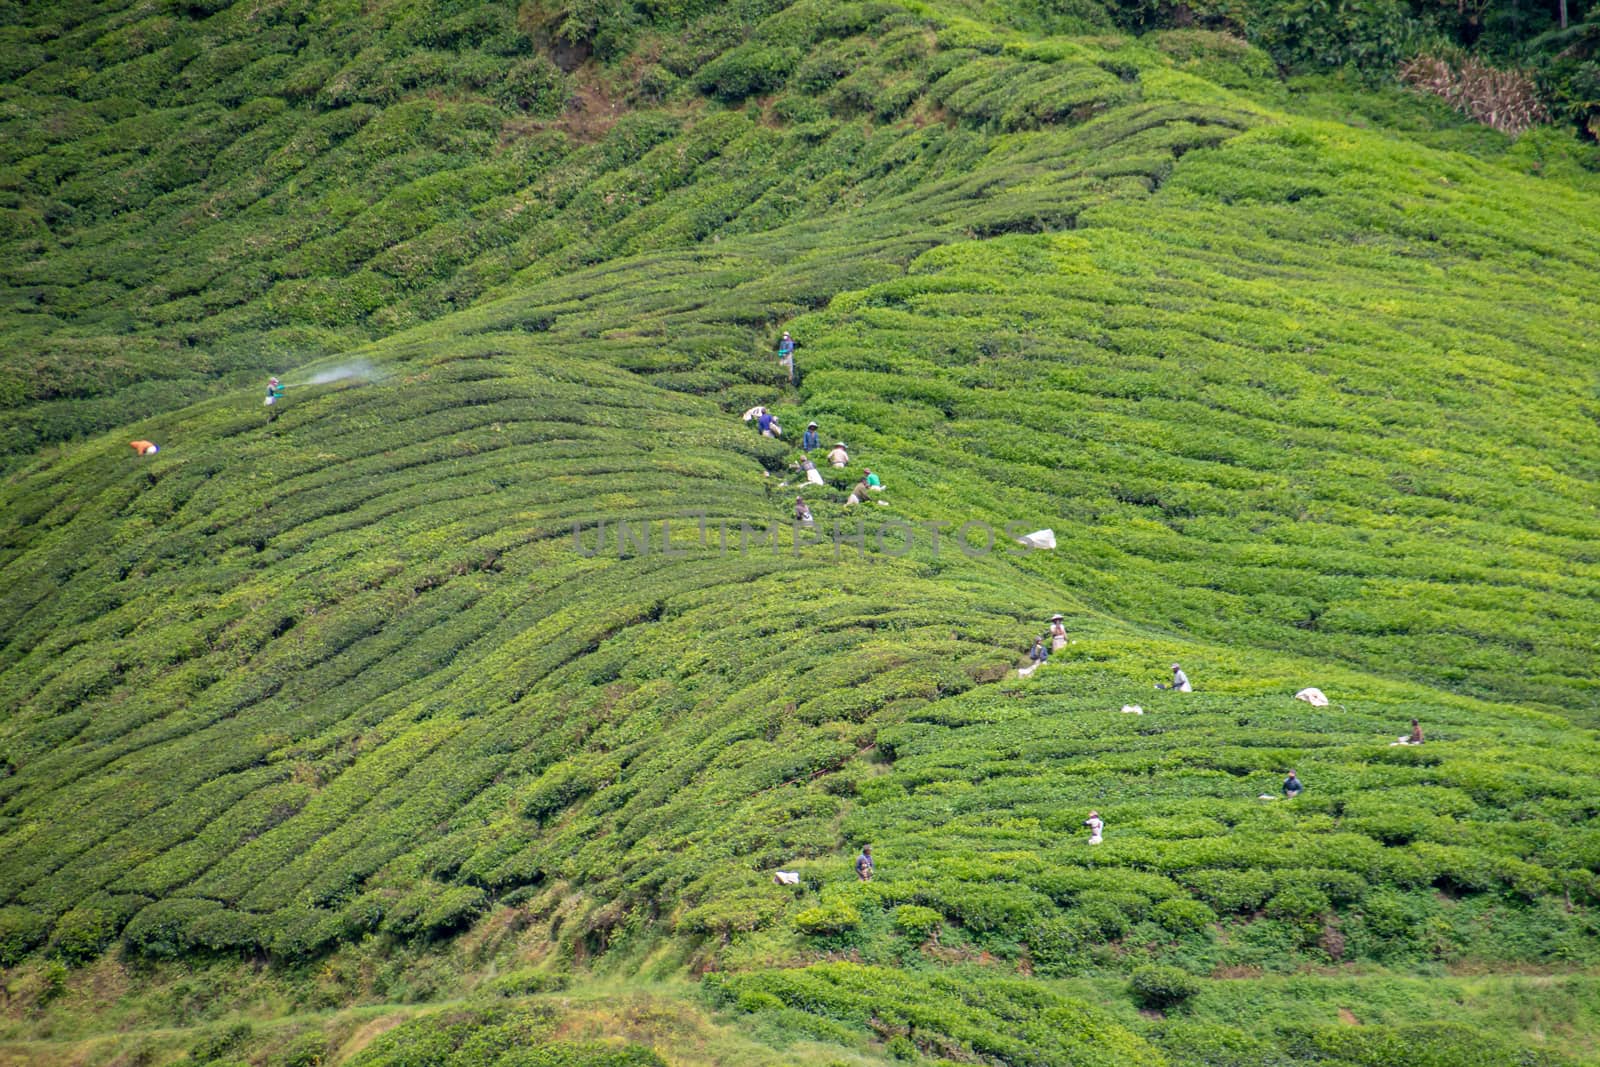 Workers at tea plantation harvesting tea leaves and spraying poisons